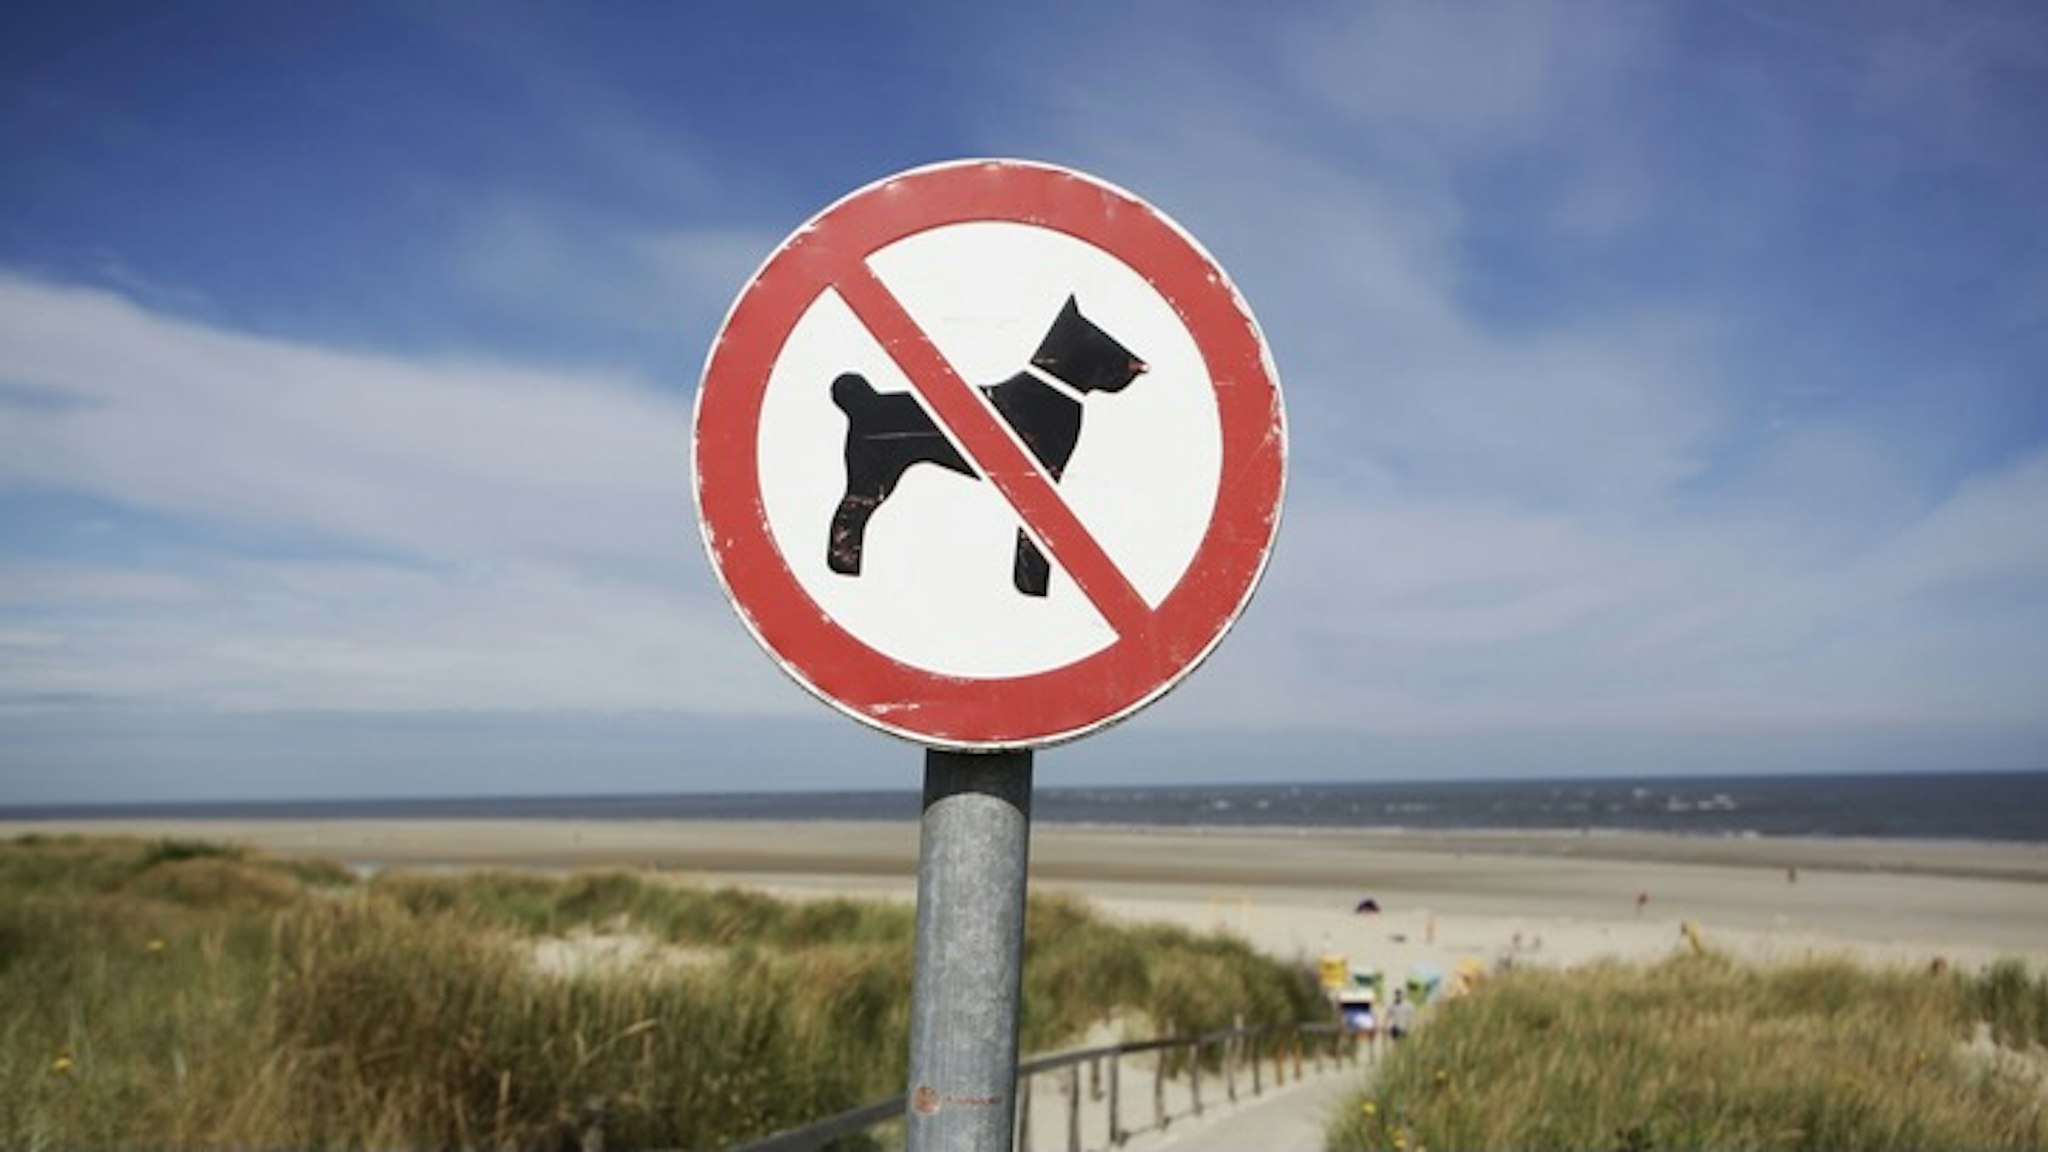 Germany, Lower Saxony, East Frisia, Langeoog, sign No dogs allowed - stock photo Westend61 via Getty Images